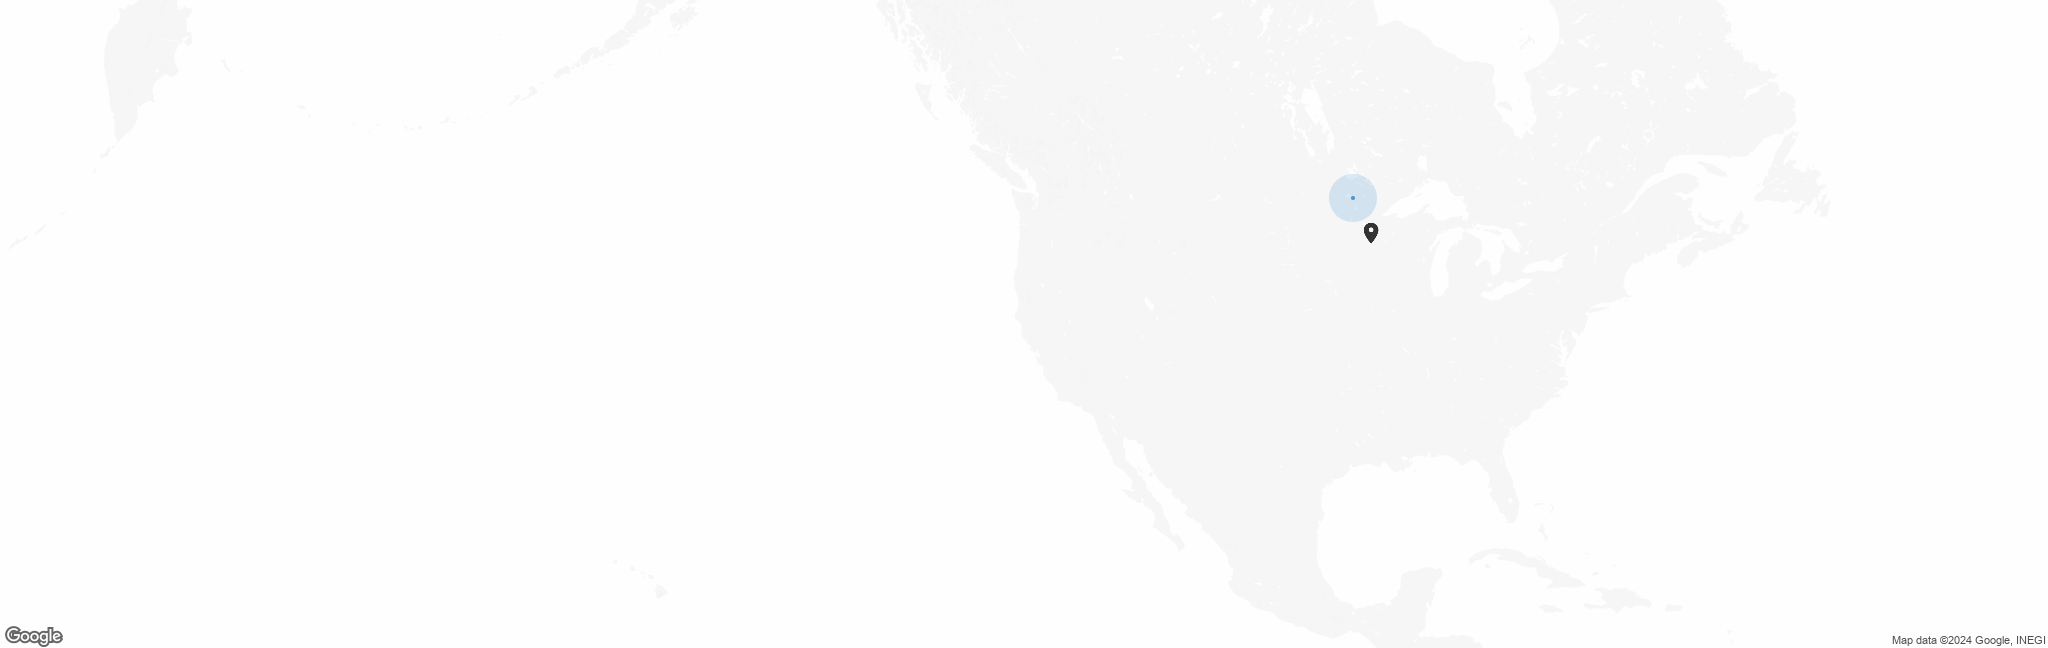 Map of US with pin of Mano a Mano International Partners location